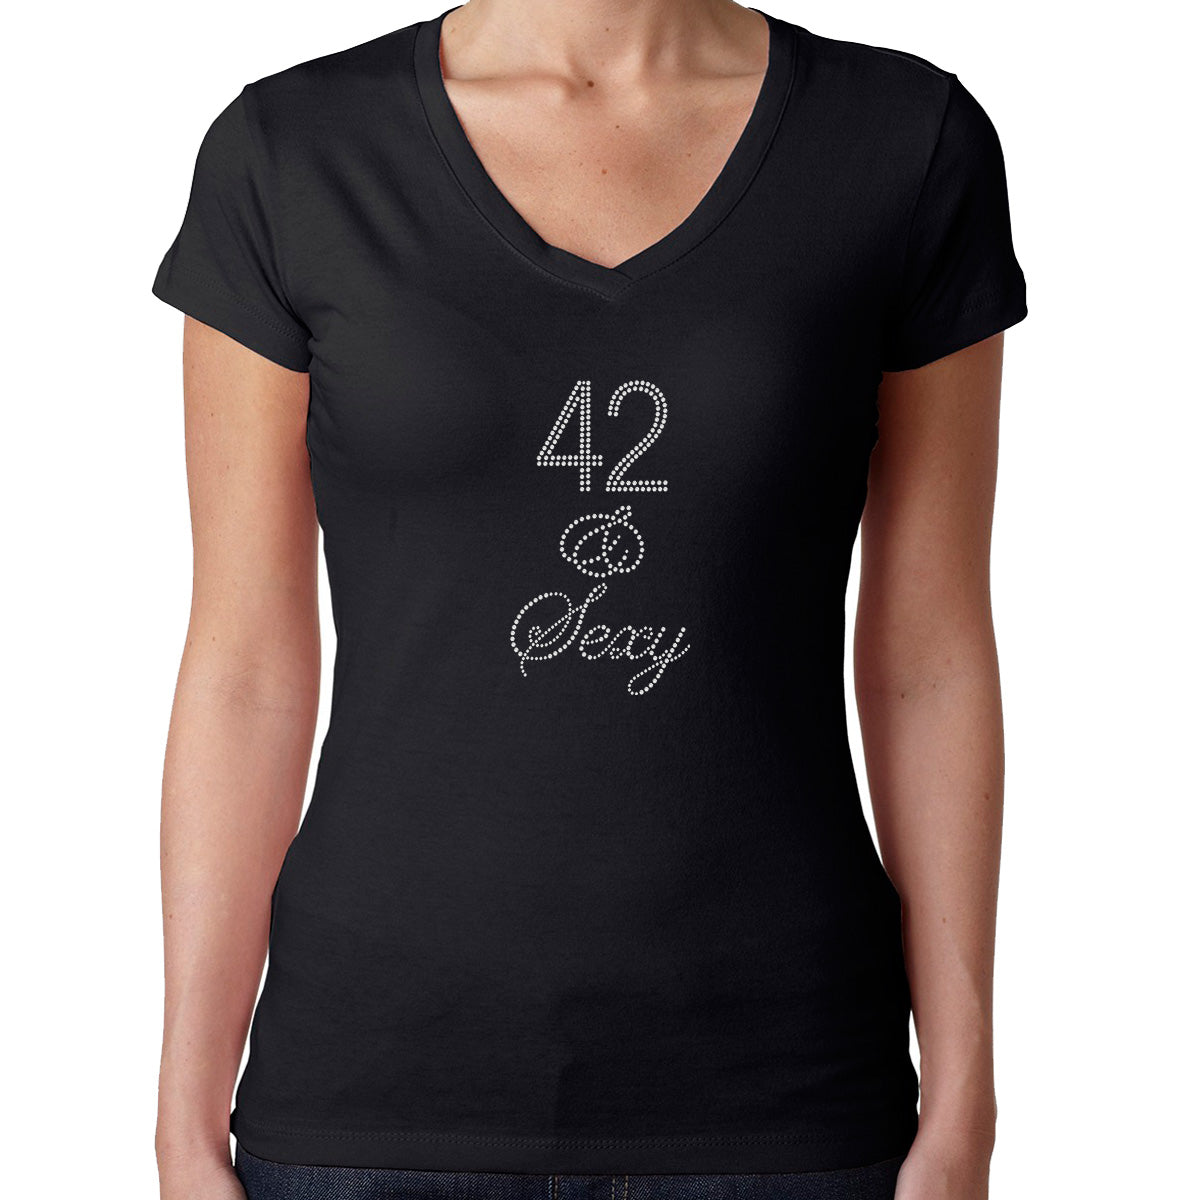 Womens T-Shirt Bling Black Fitted Tee 42 and Sexy Clear Silver